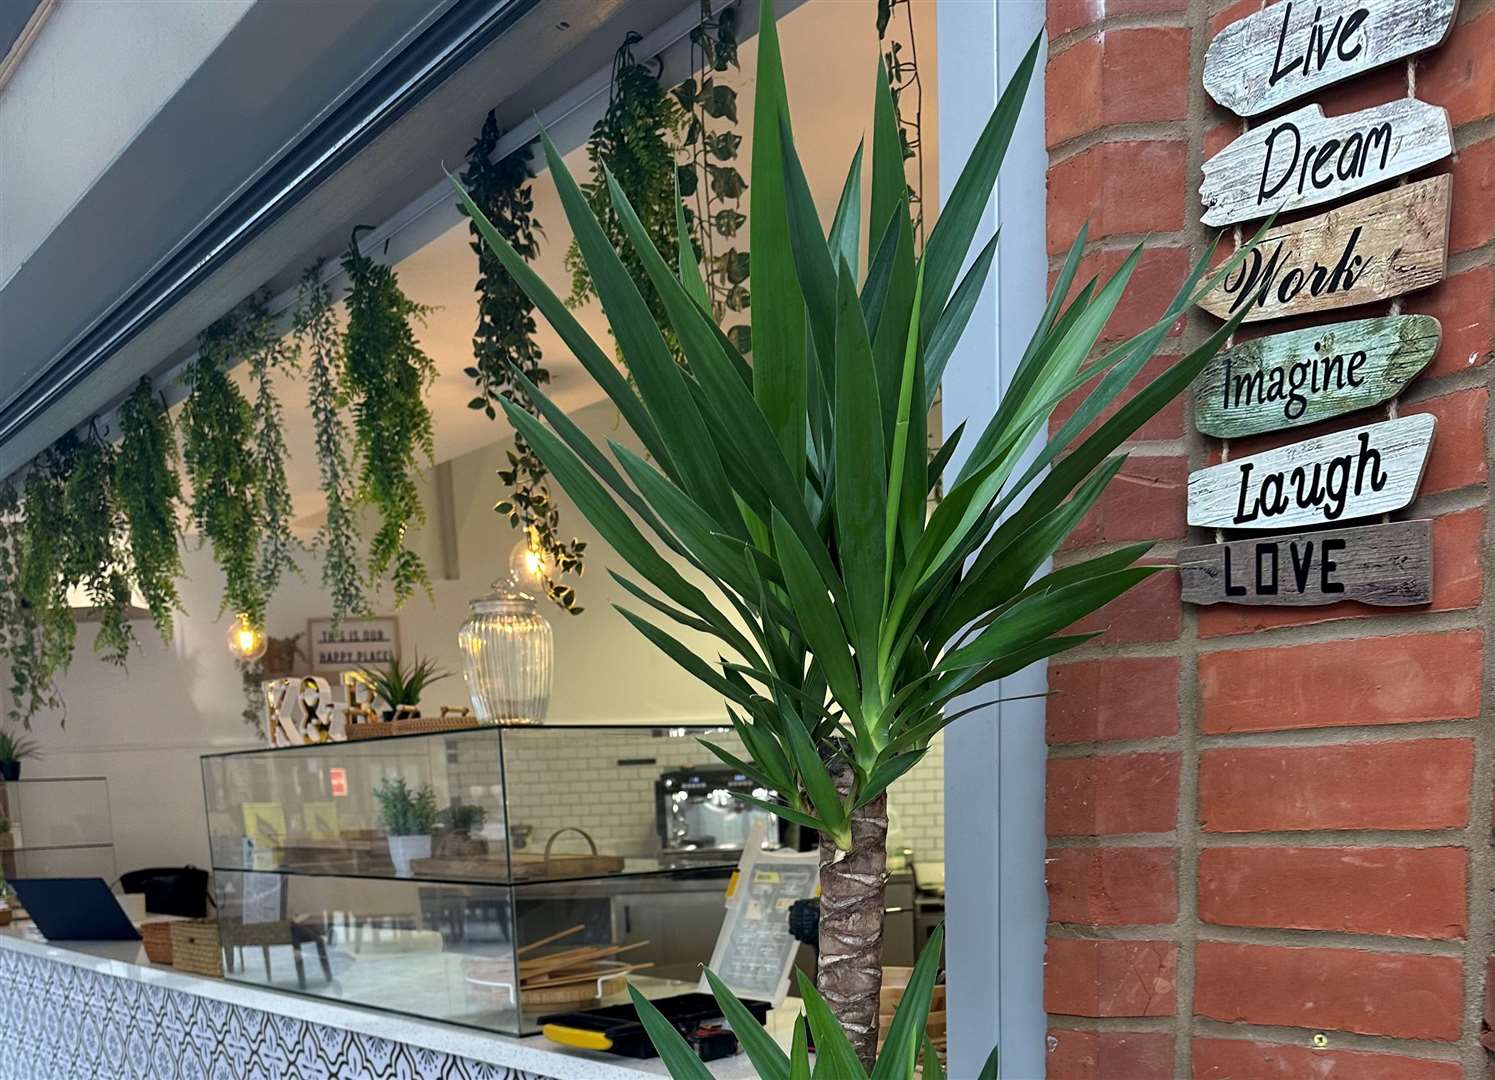 A new coffee shop has opened in the Royal Star Arcade shopping centre in Maidstone